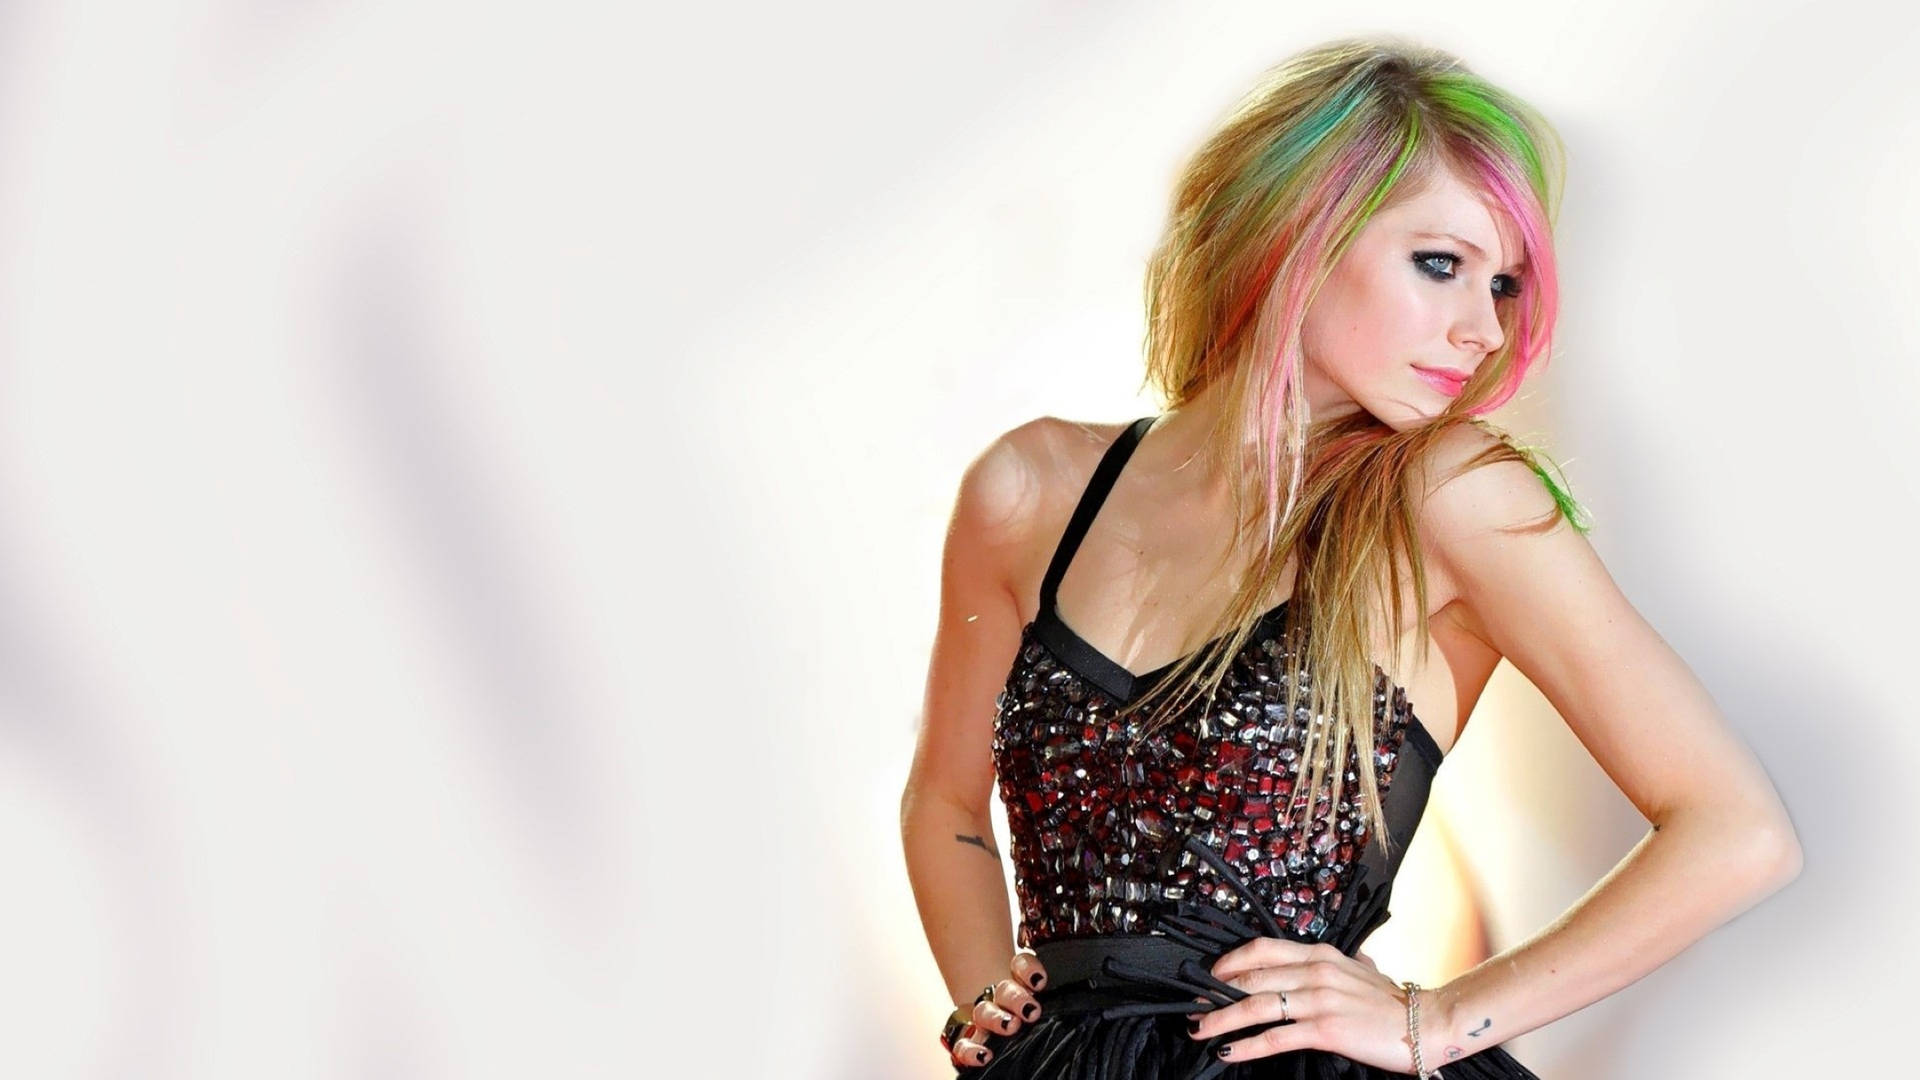 Colored-hair Avril Lavigne Background